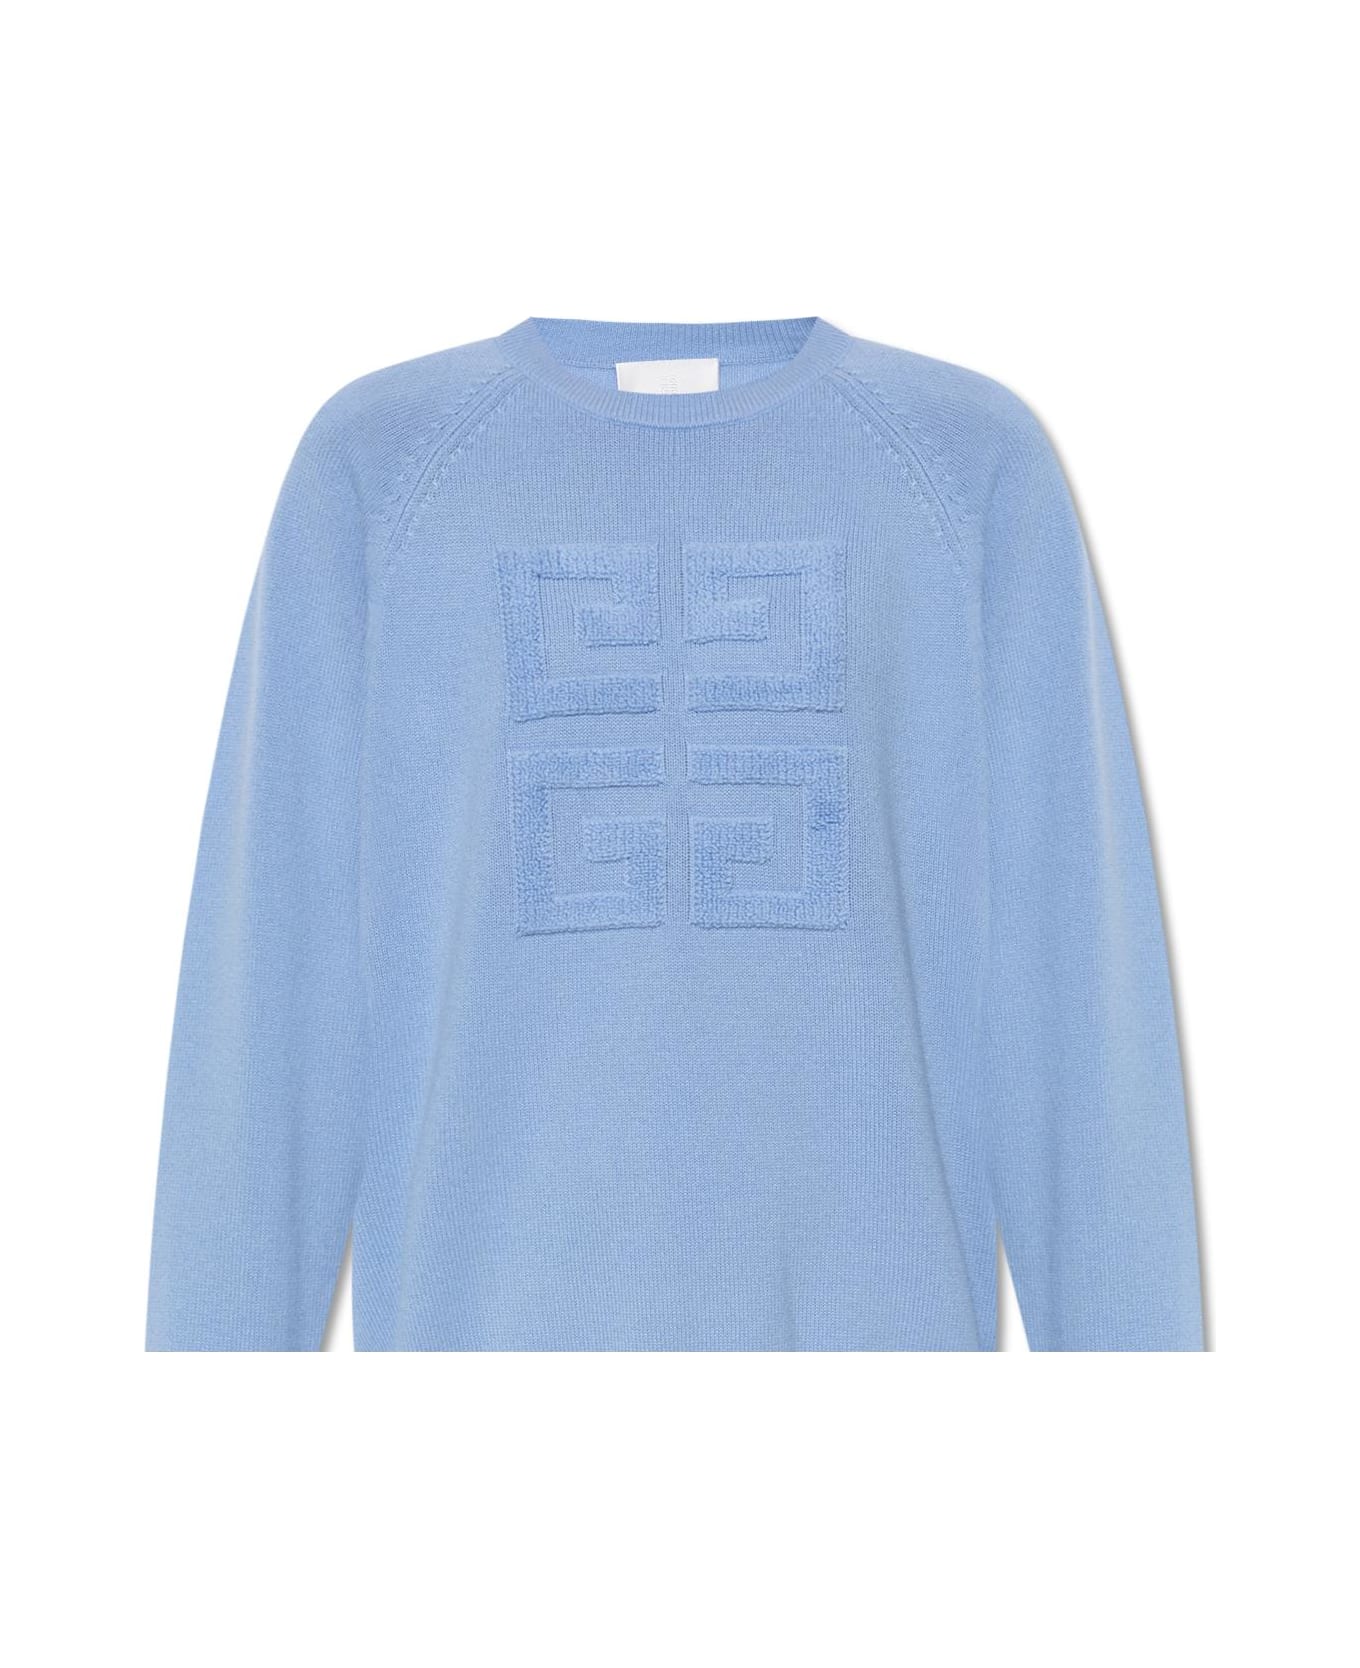 Givenchy Cashmere Sweater - Blue